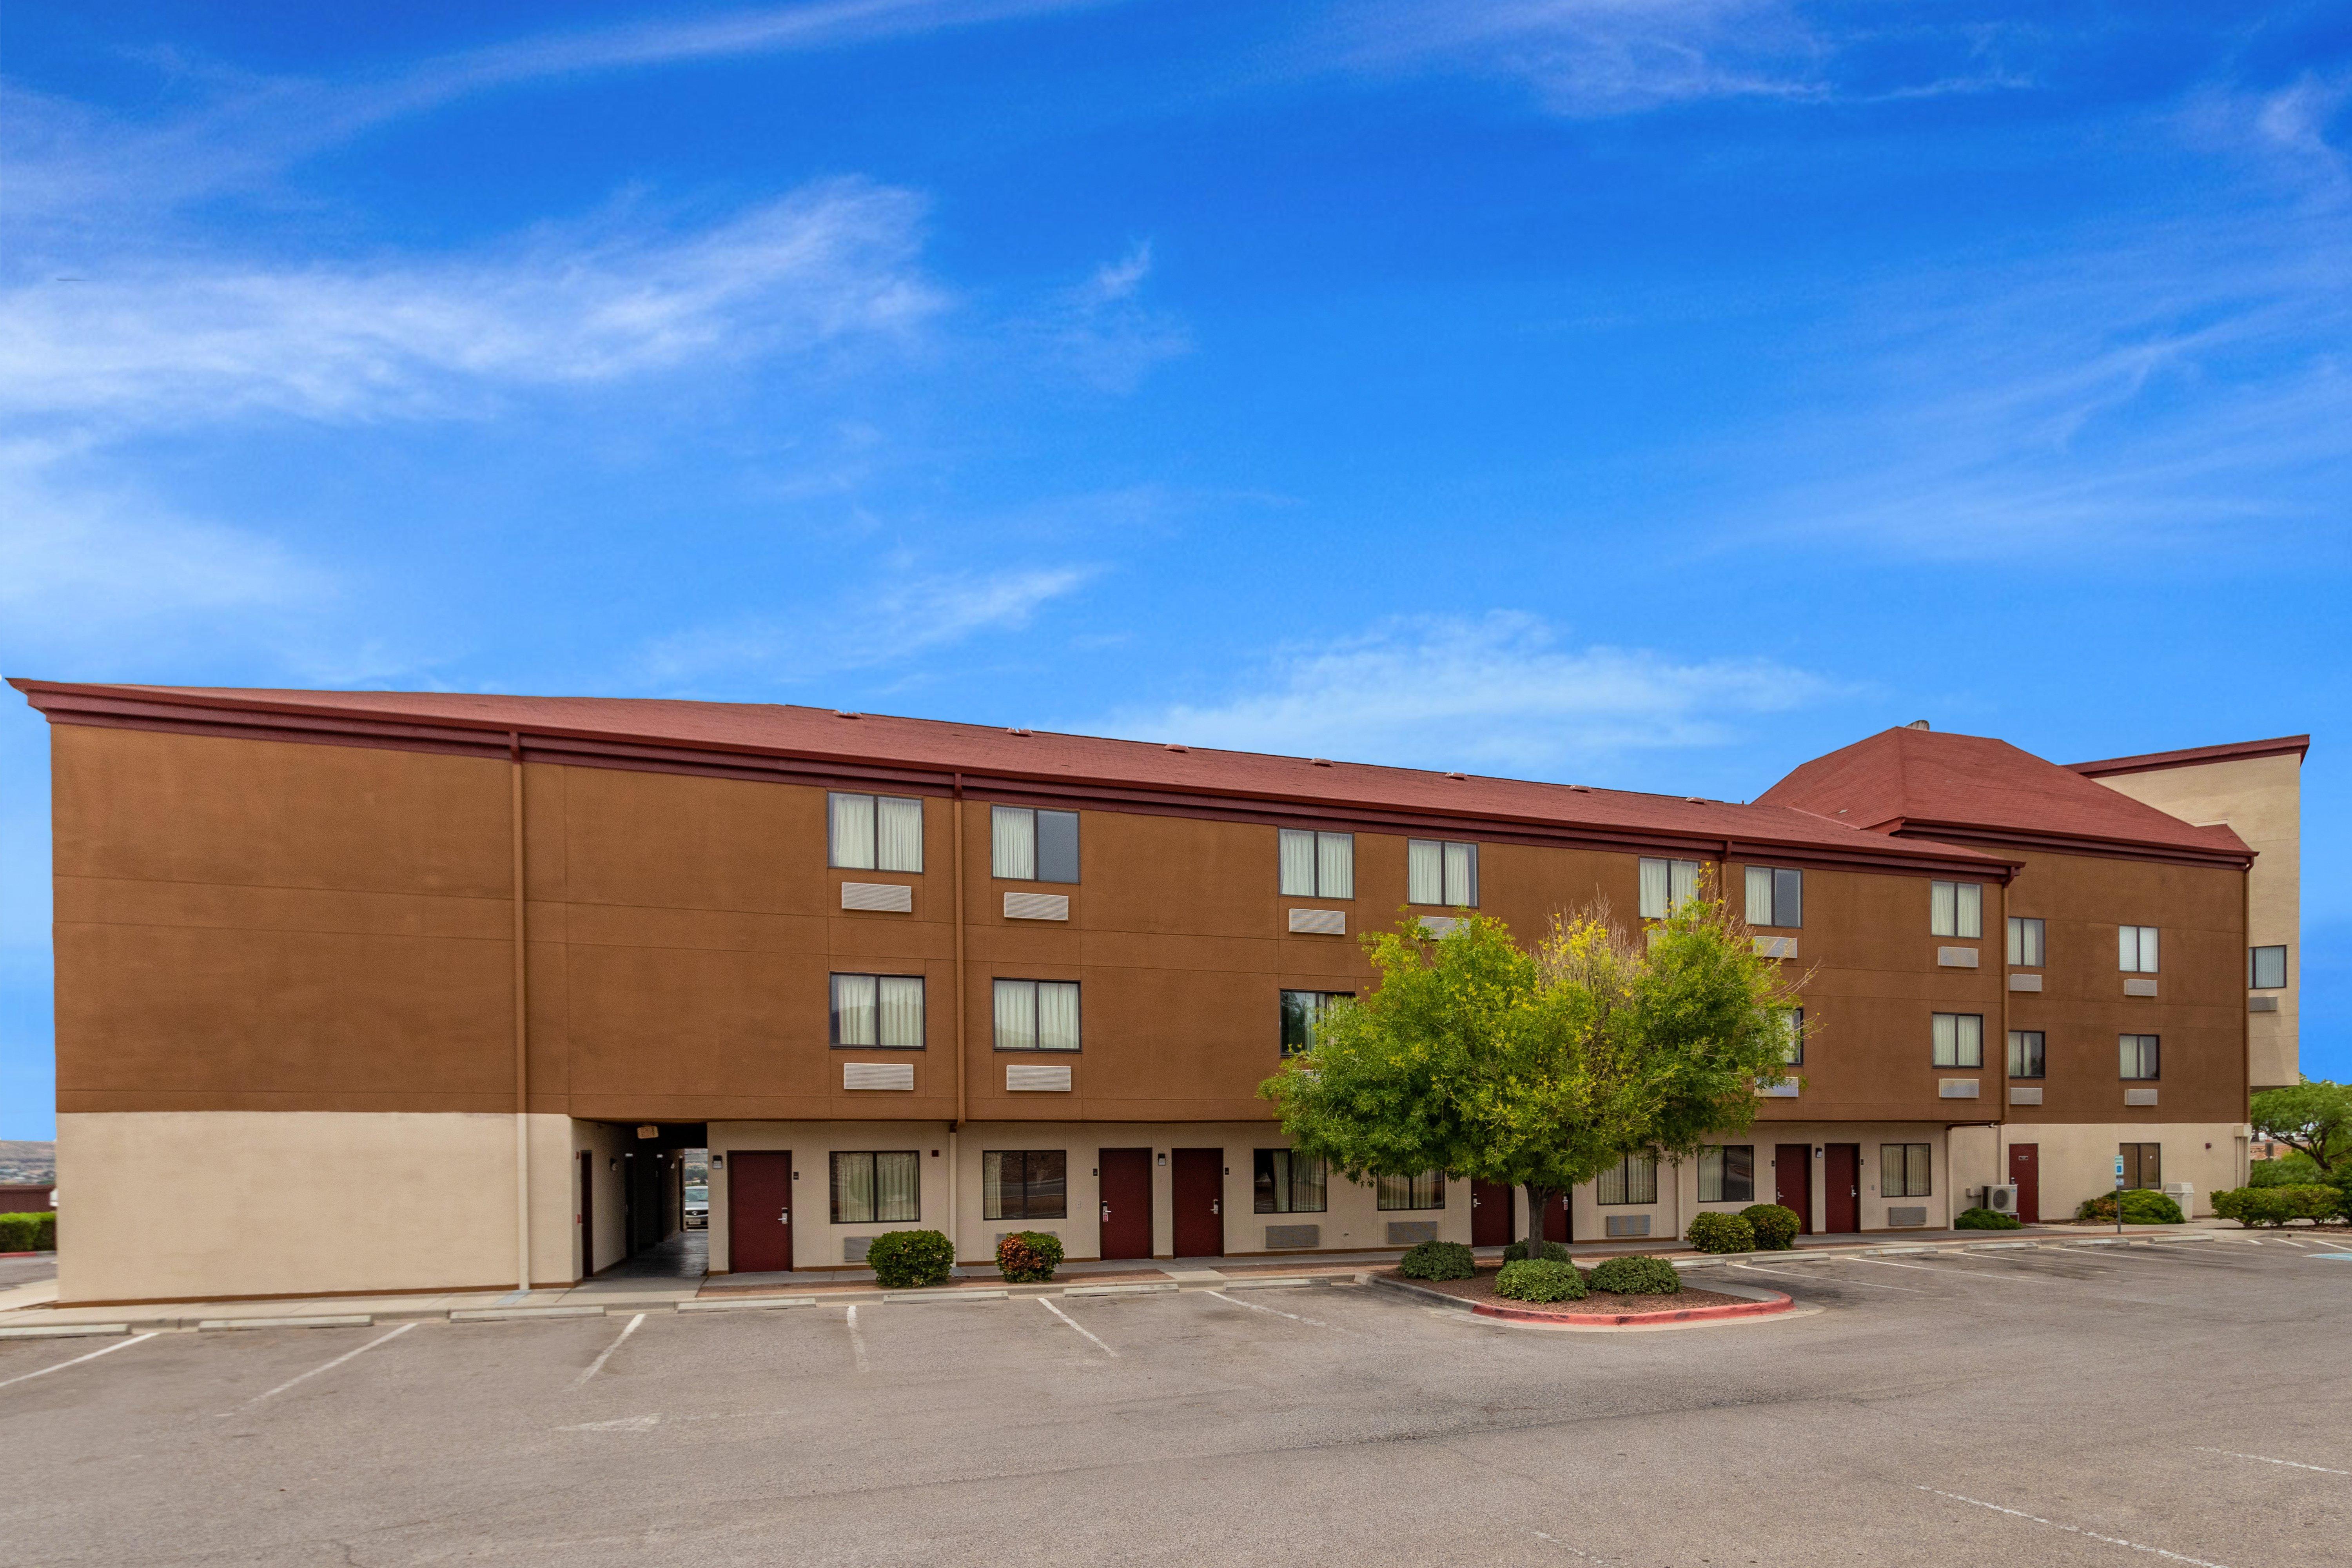 Red Roof Inn El Paso West Exterior photo